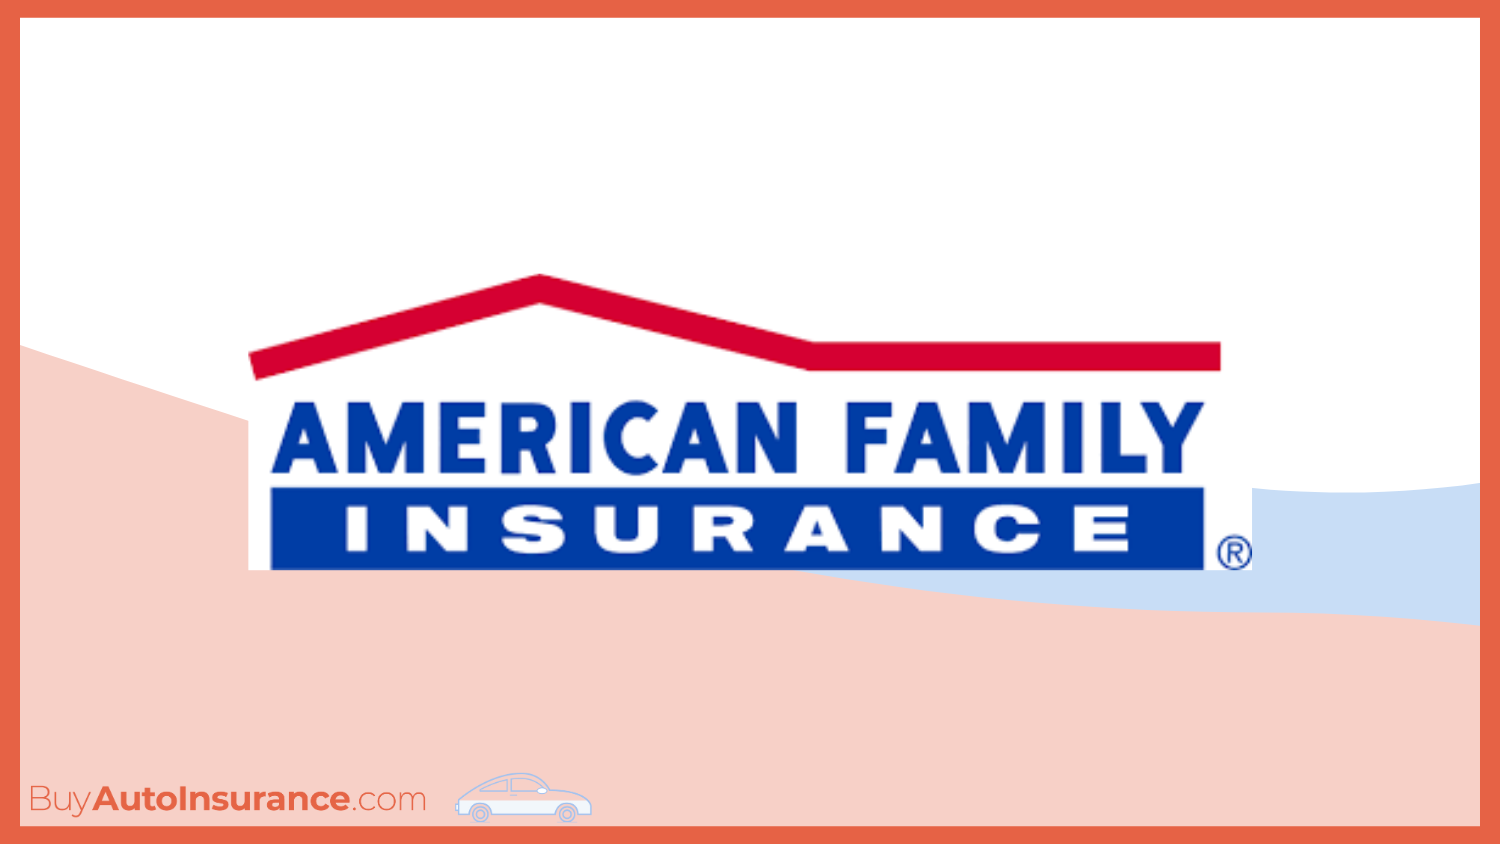 Cheap Auto Insurance Companies That Don't Monitor Your Driving: American Family